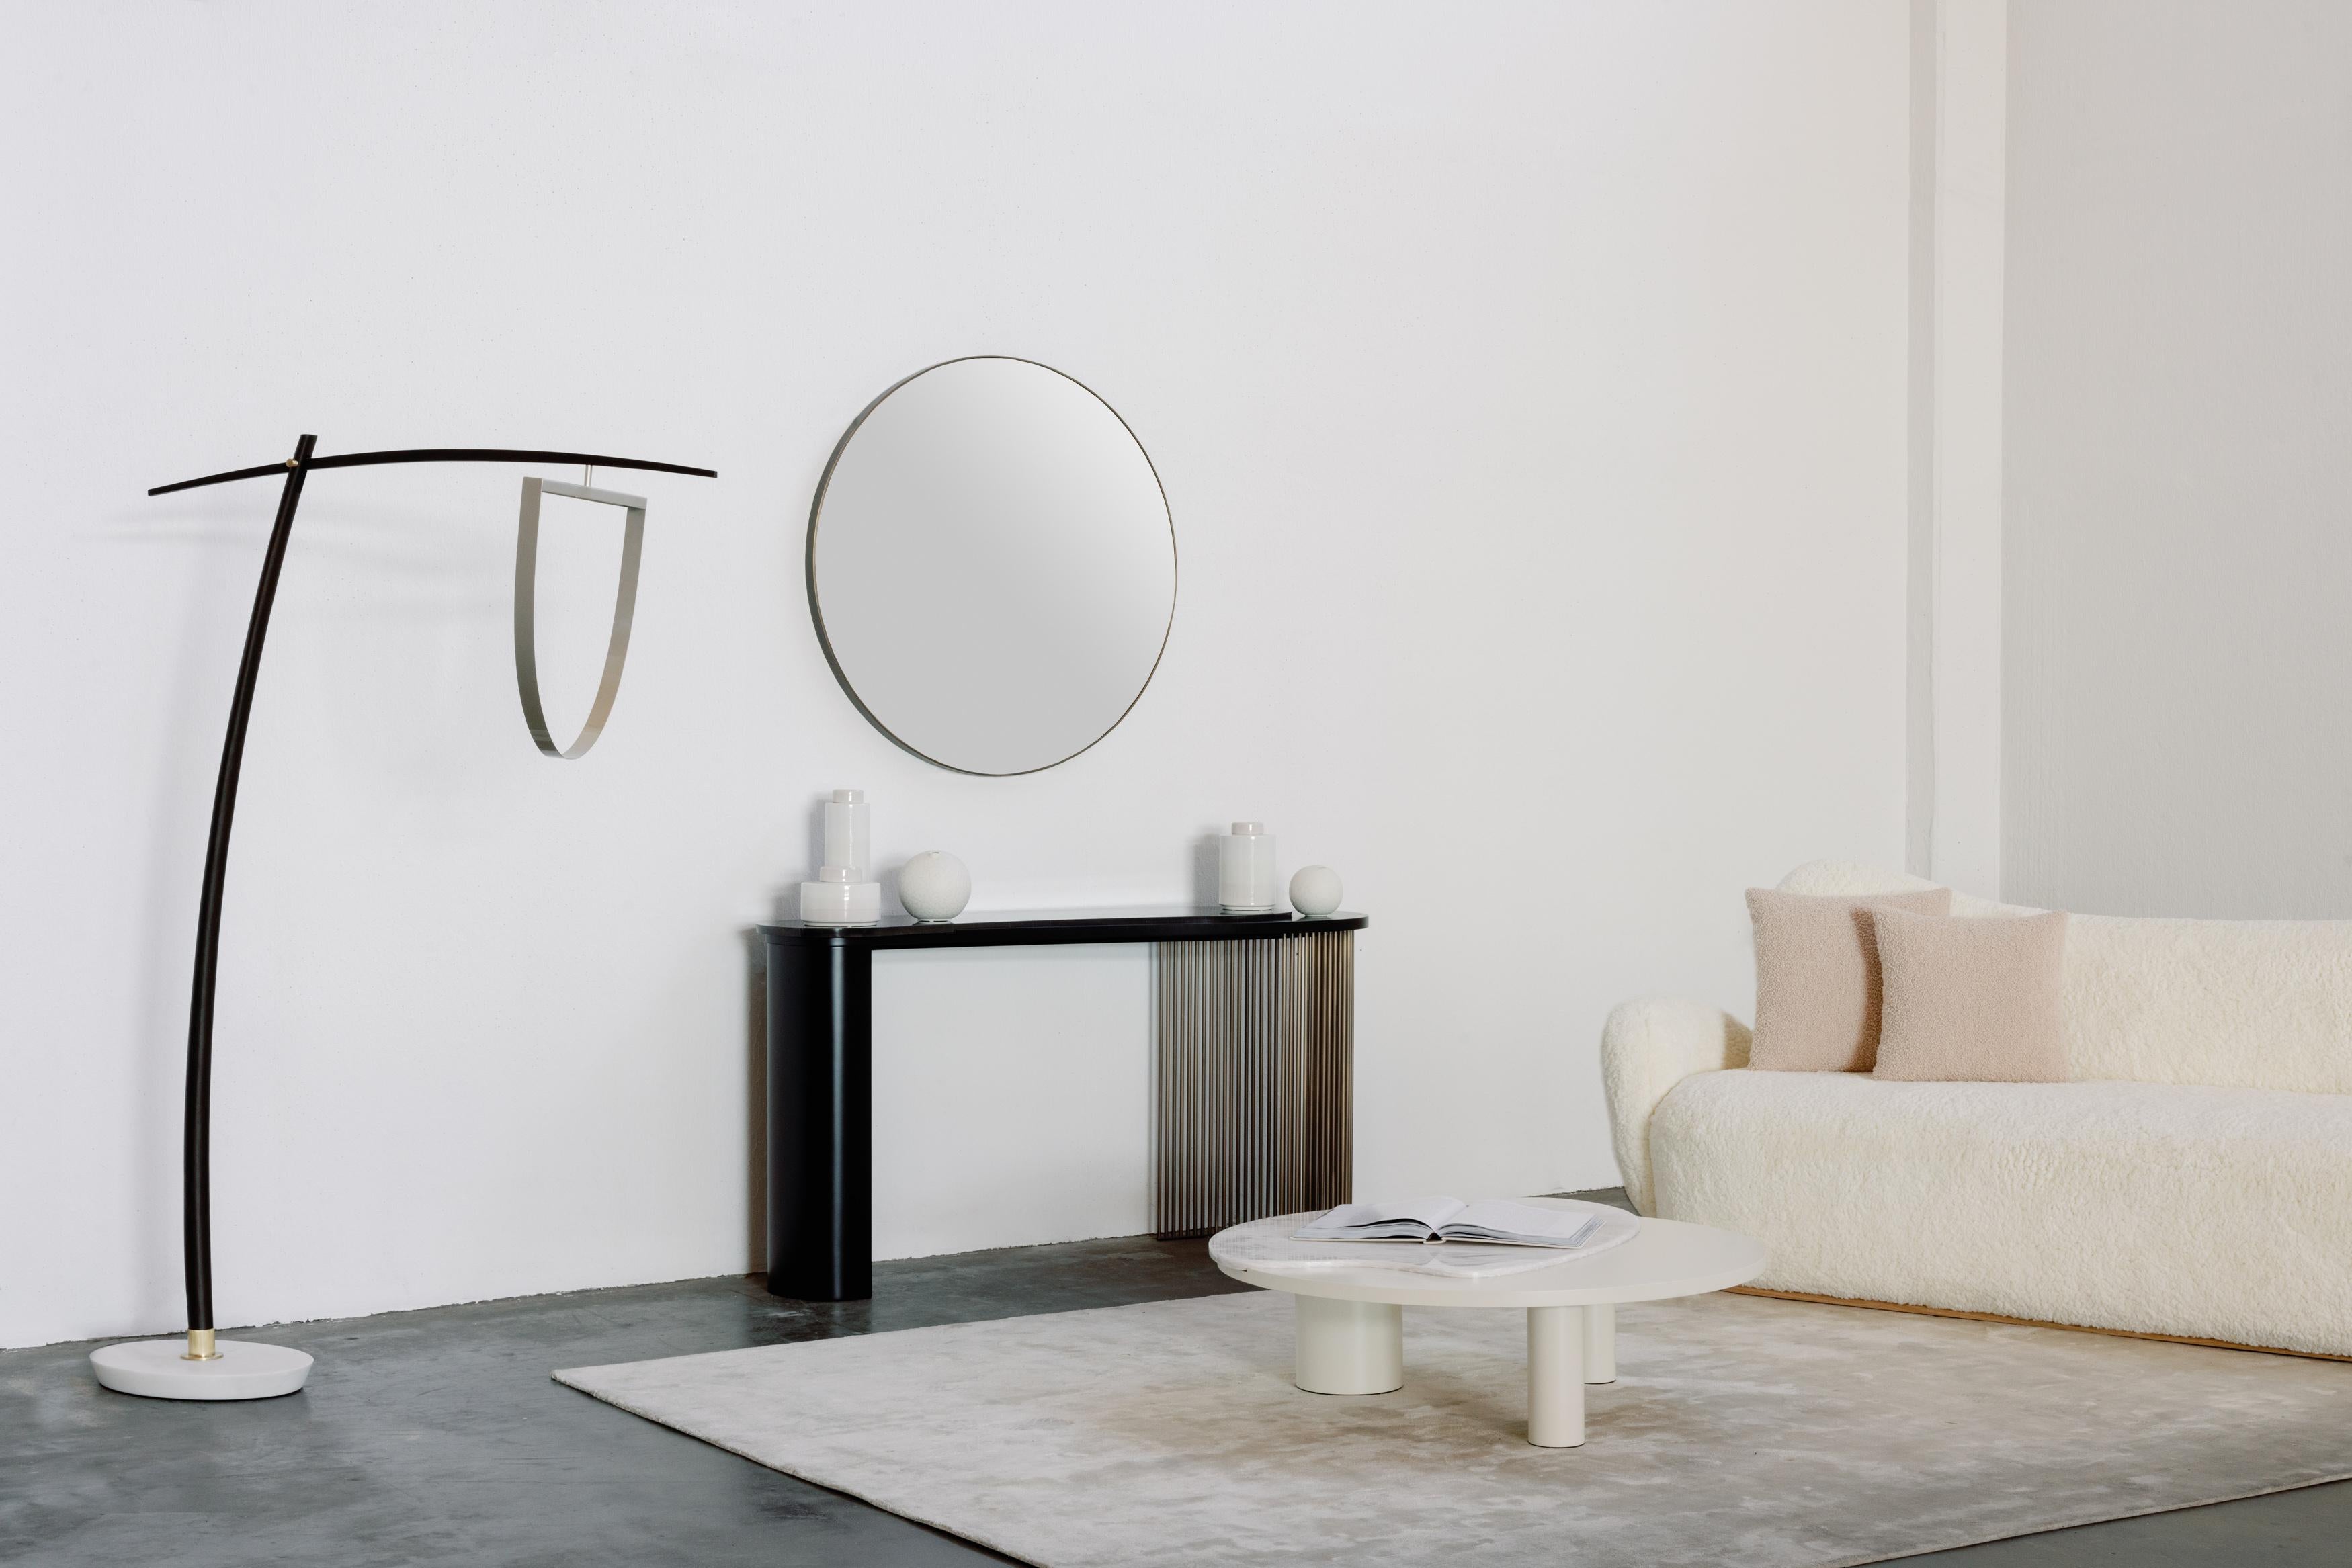 Lima arc floor lamp, Contemporary collection, handcrafted in Portugal - Europe by Greenapple.

The Lima arc floor lamp brings the creative vision to life through its flowing organic design, enhancing the atmosphere of the modern home. Handcrafted